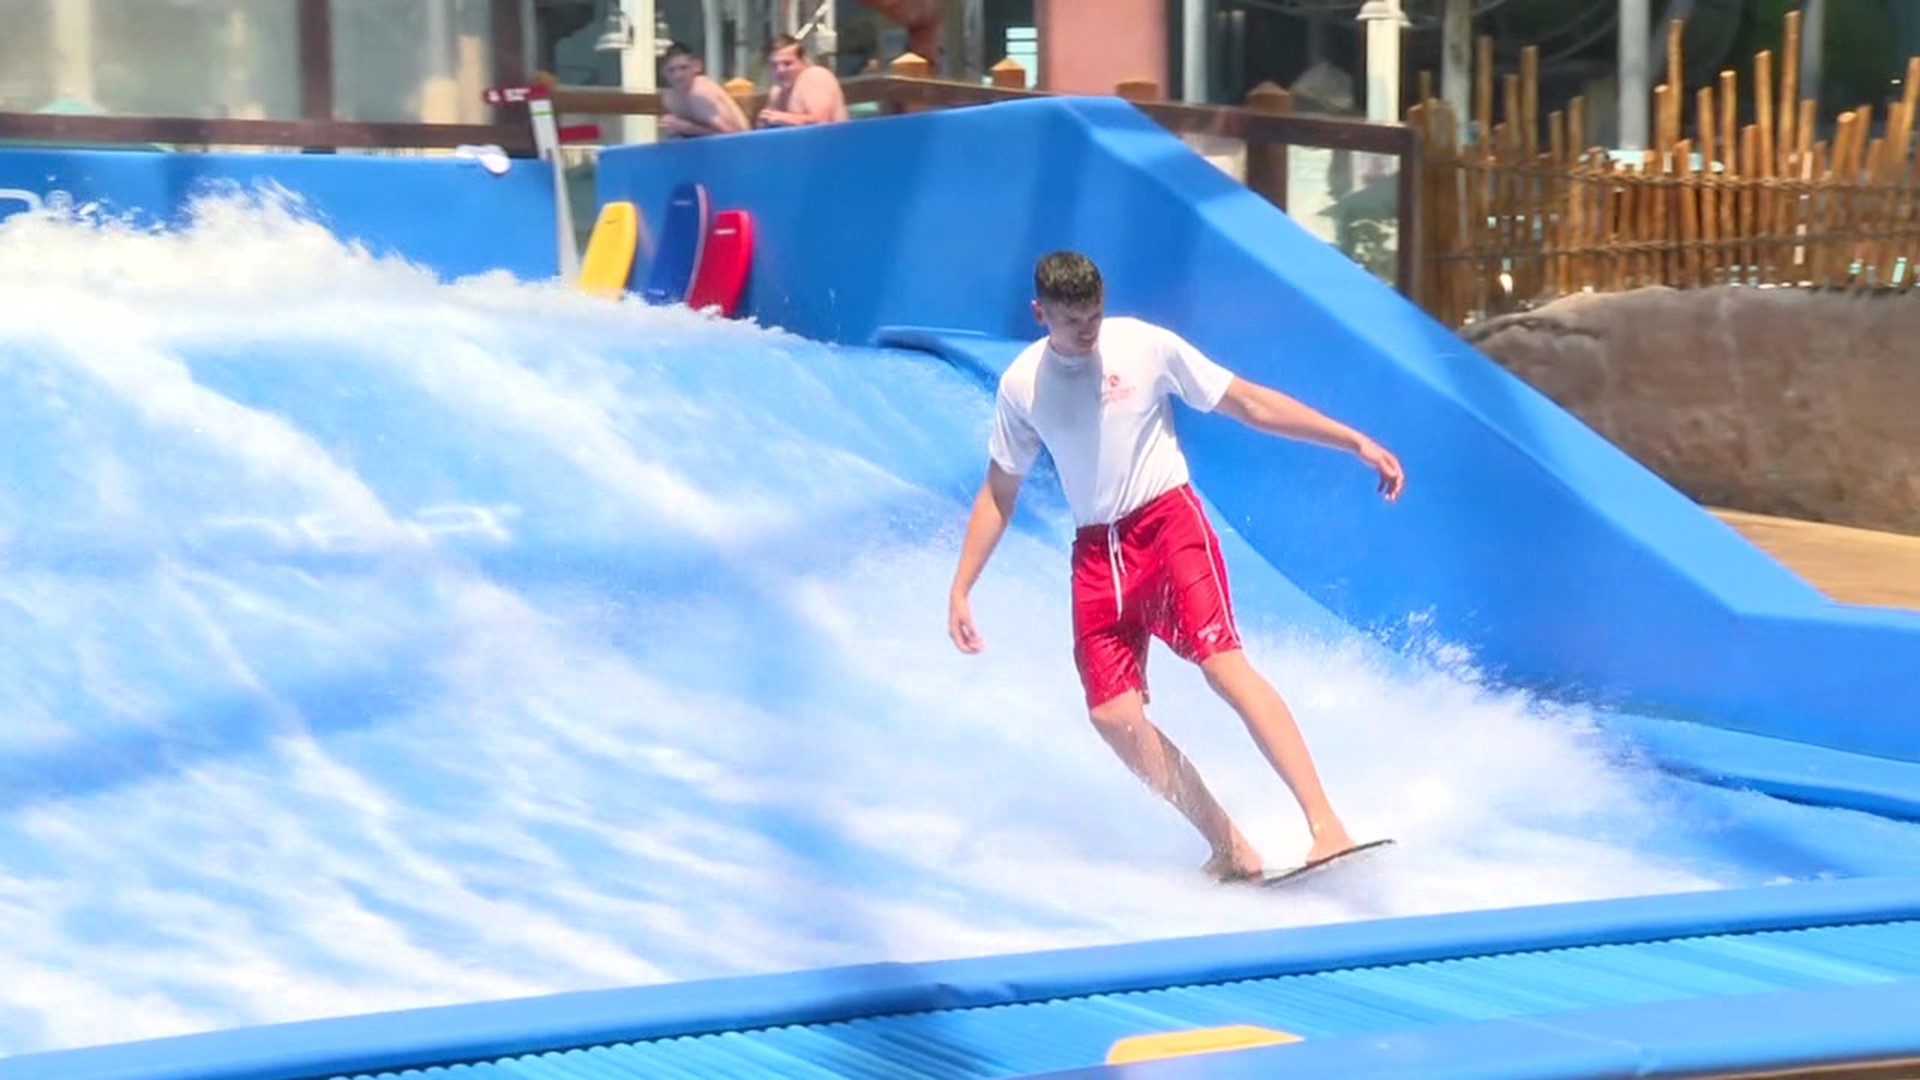 Camelback resort is almost sold out for the holiday weekend, with many attractions open.